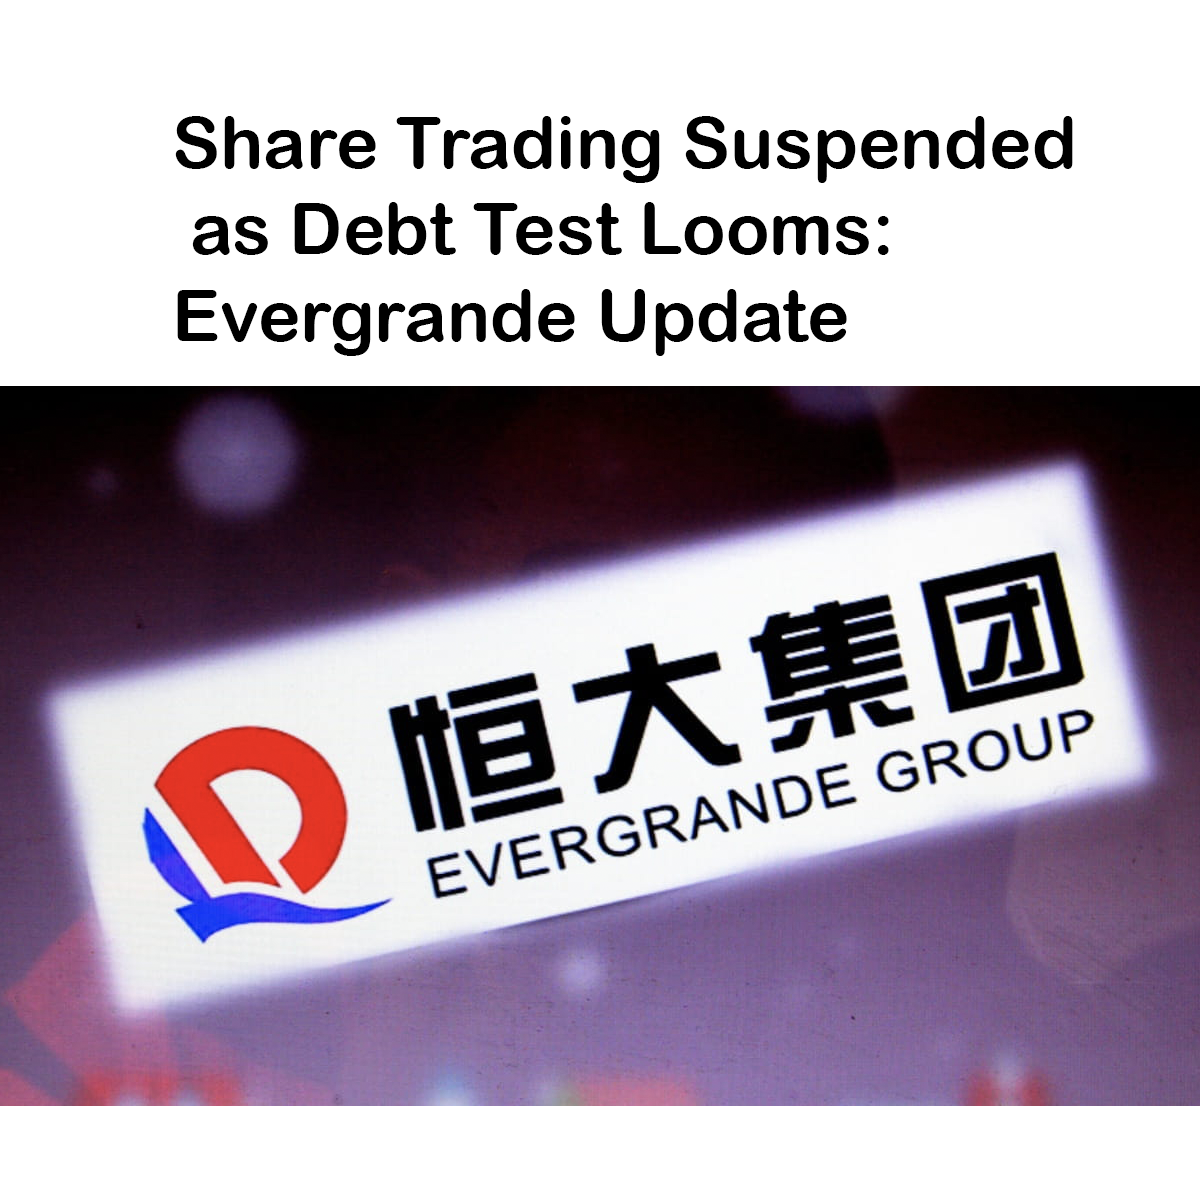 Share Trading Suspended as Debt Test Looms: Evergrande Update